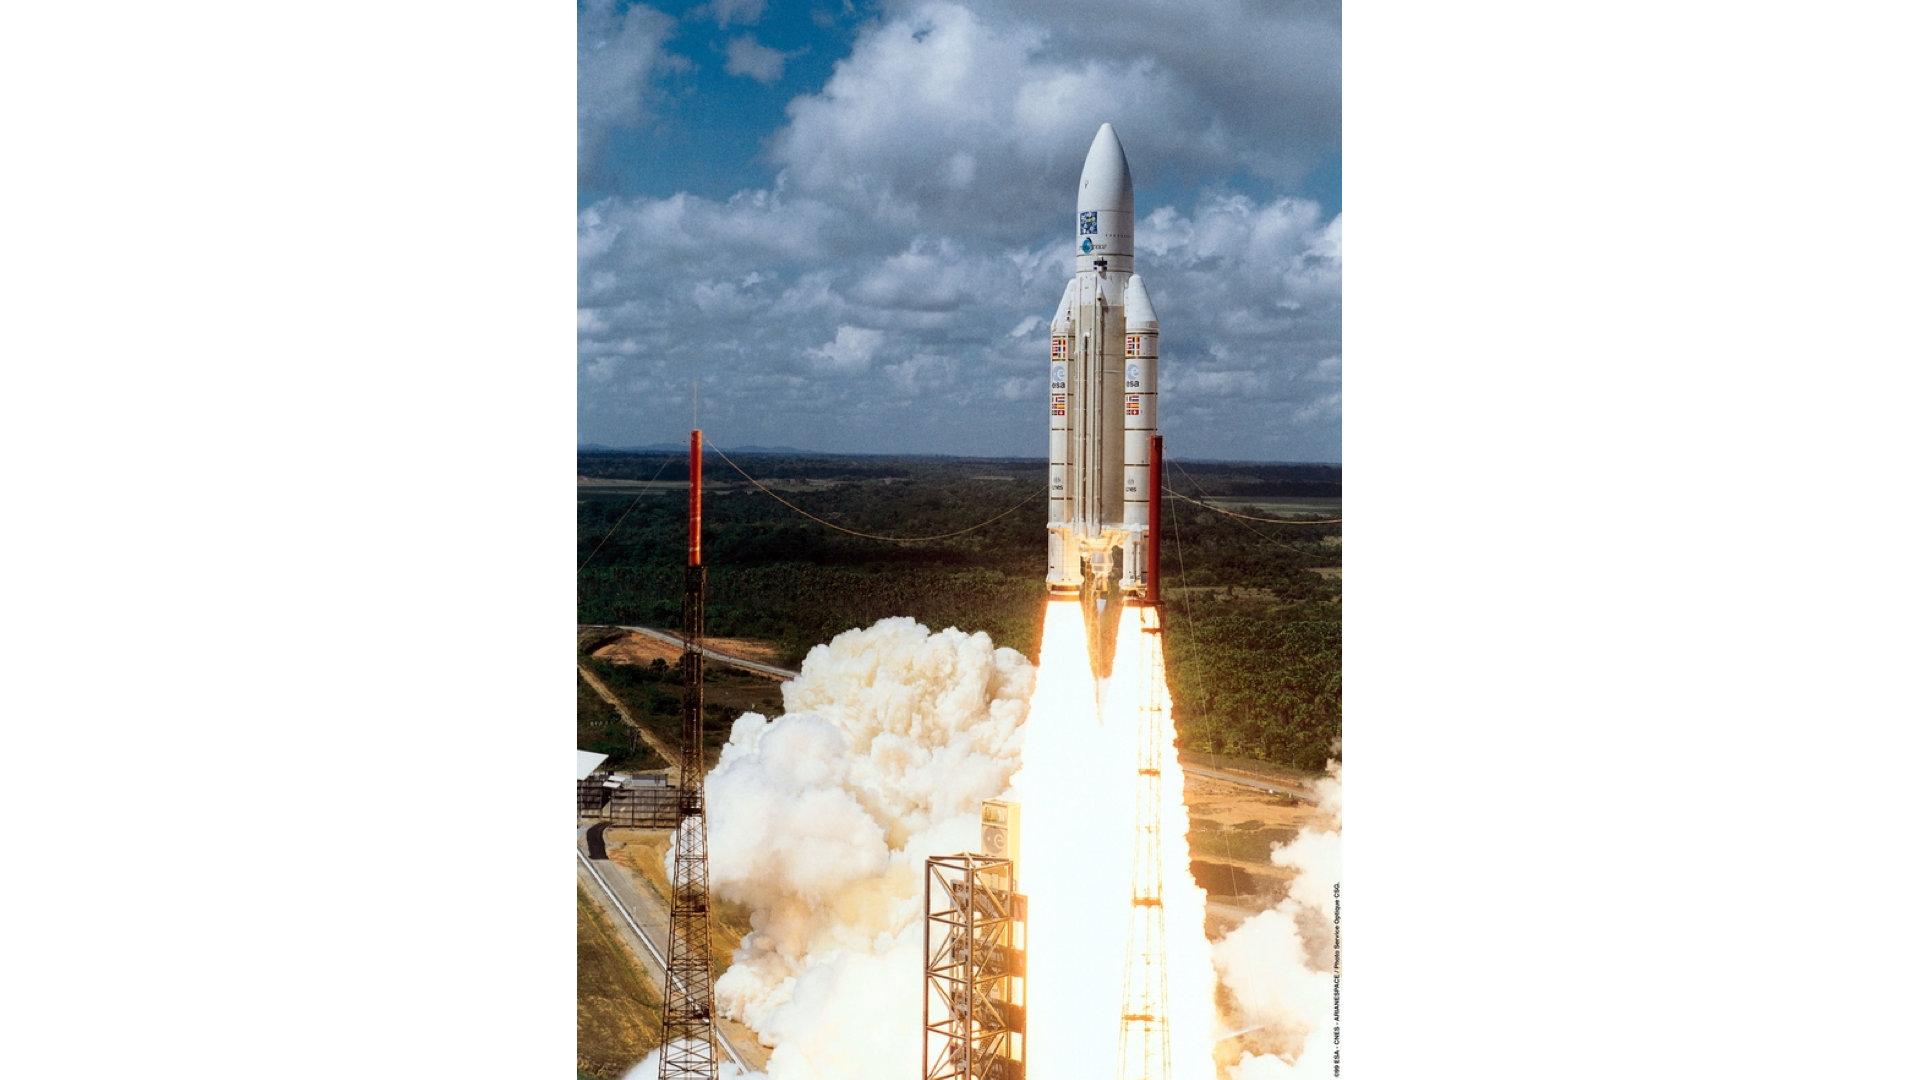 An ariane 5 rocket lifts off from its launchpad against the backdrop of green forest and blue skies.